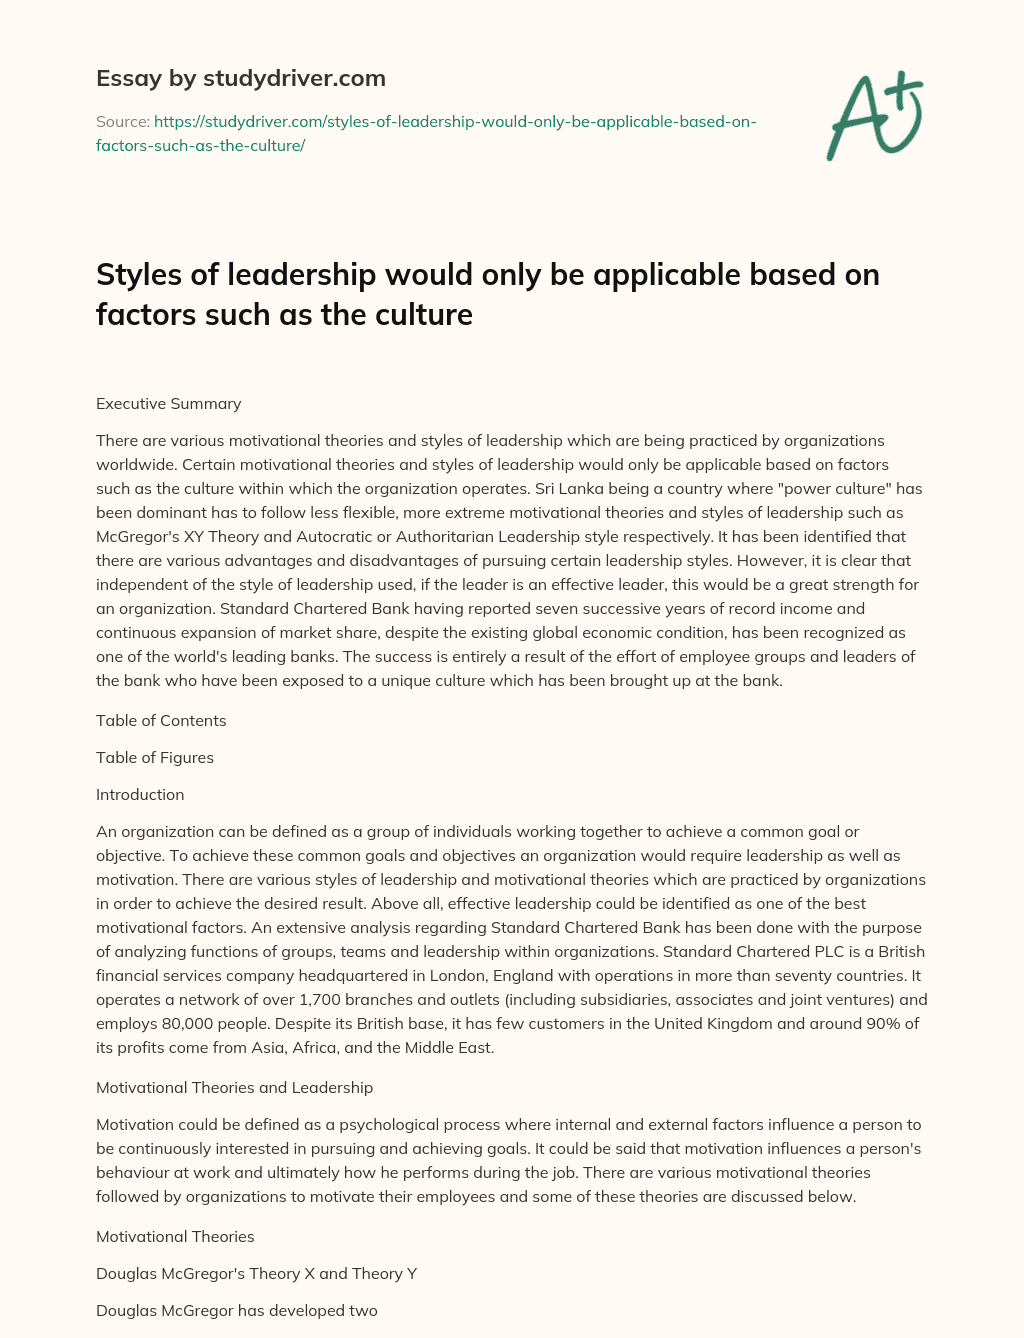 Styles of Leadership would only be Applicable Based on Factors such as the Culture essay